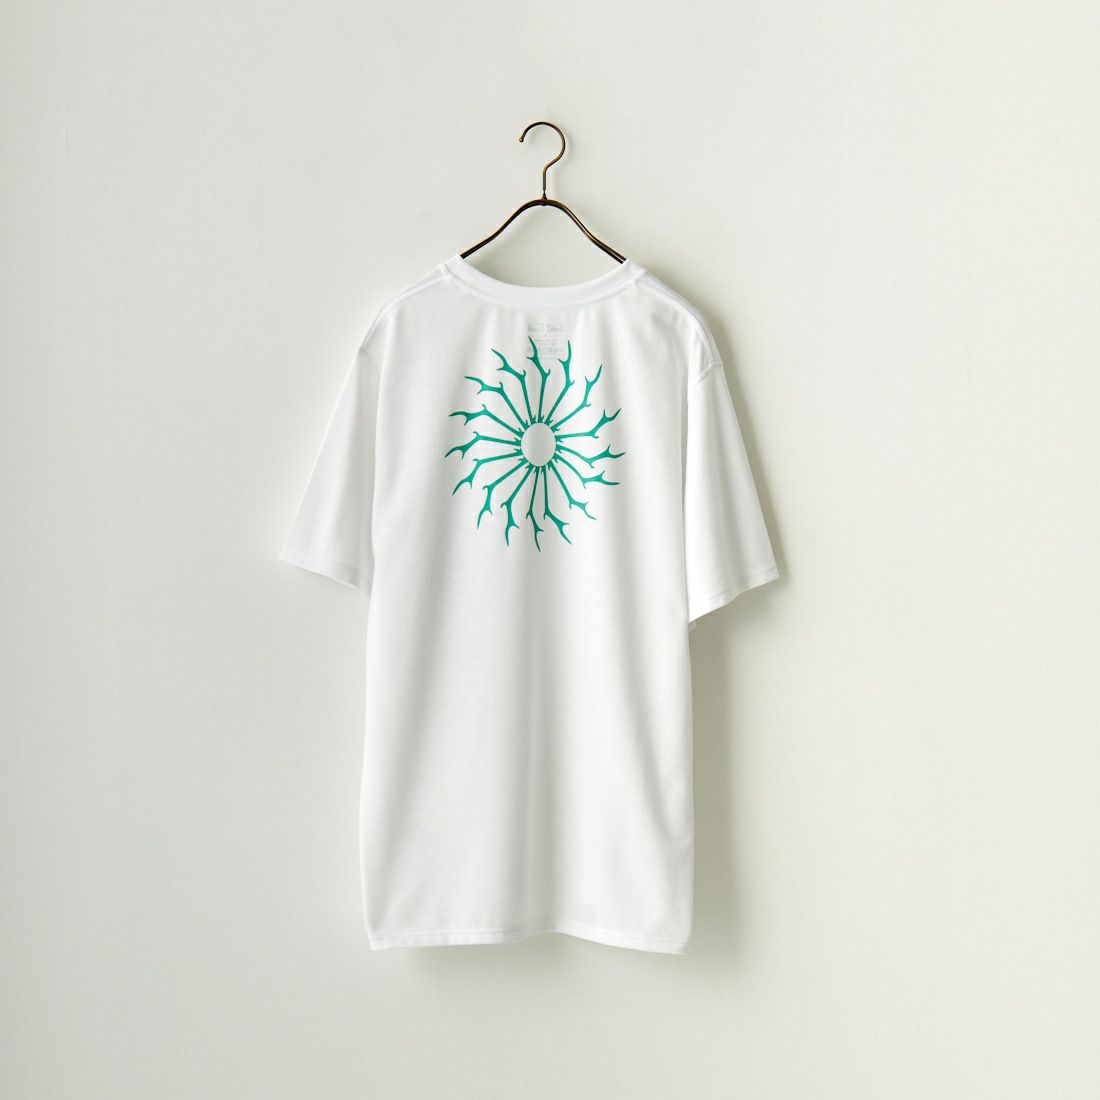 South2West8 [サウスツーウエストエイト] ポケットTシャツ [MR834] A WHITE